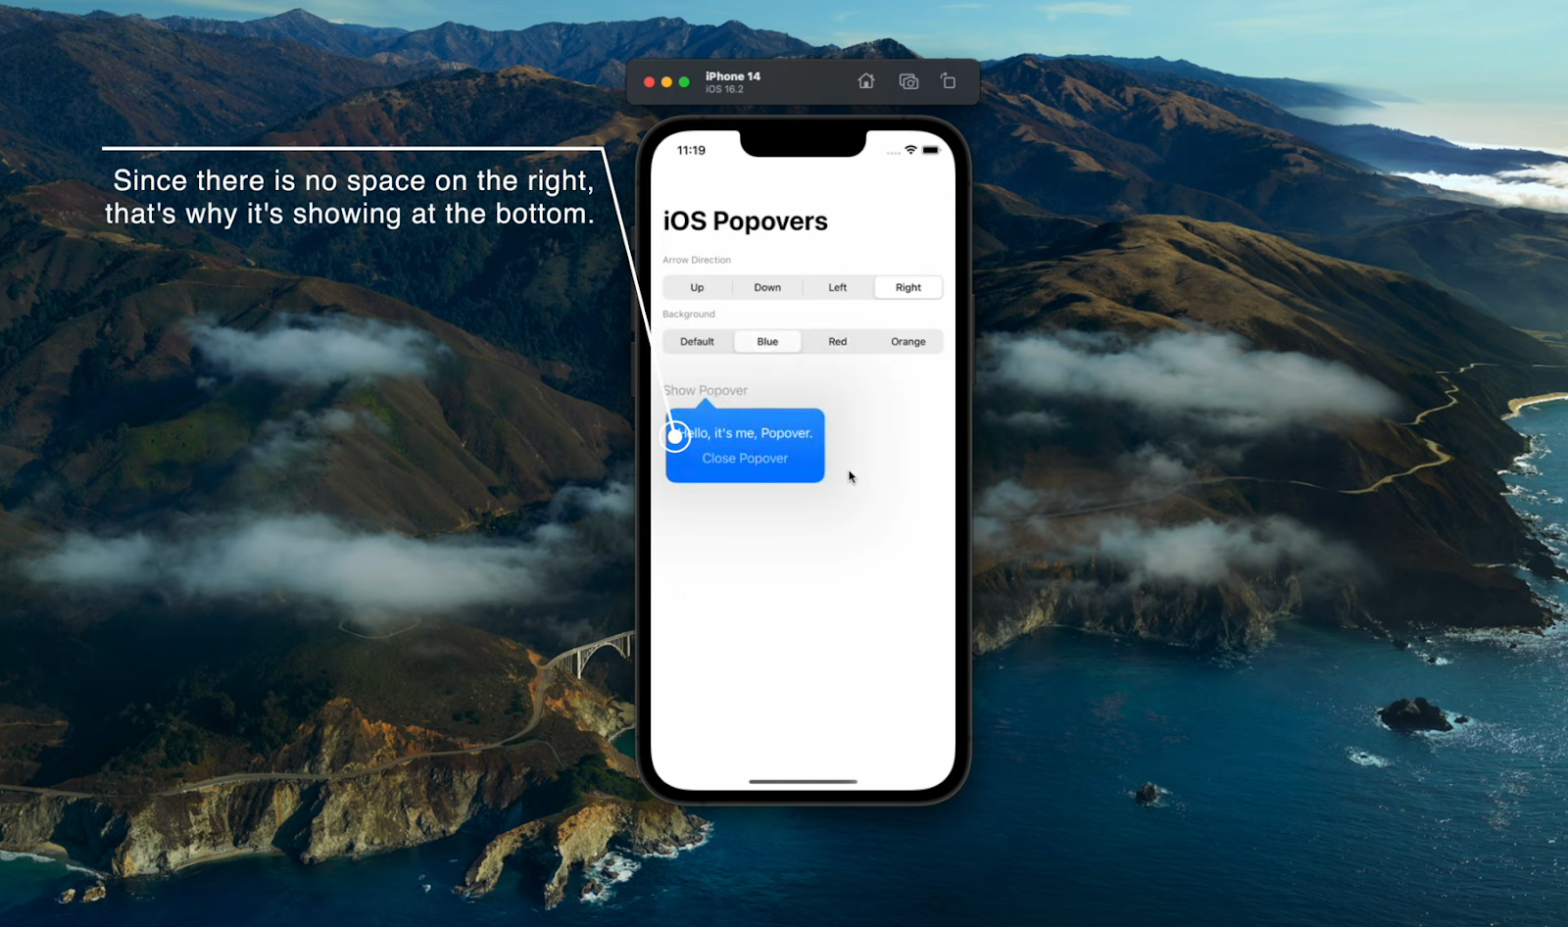 iPhone screen displaying "iOS Popovers" with mountainous background and a pop-up message